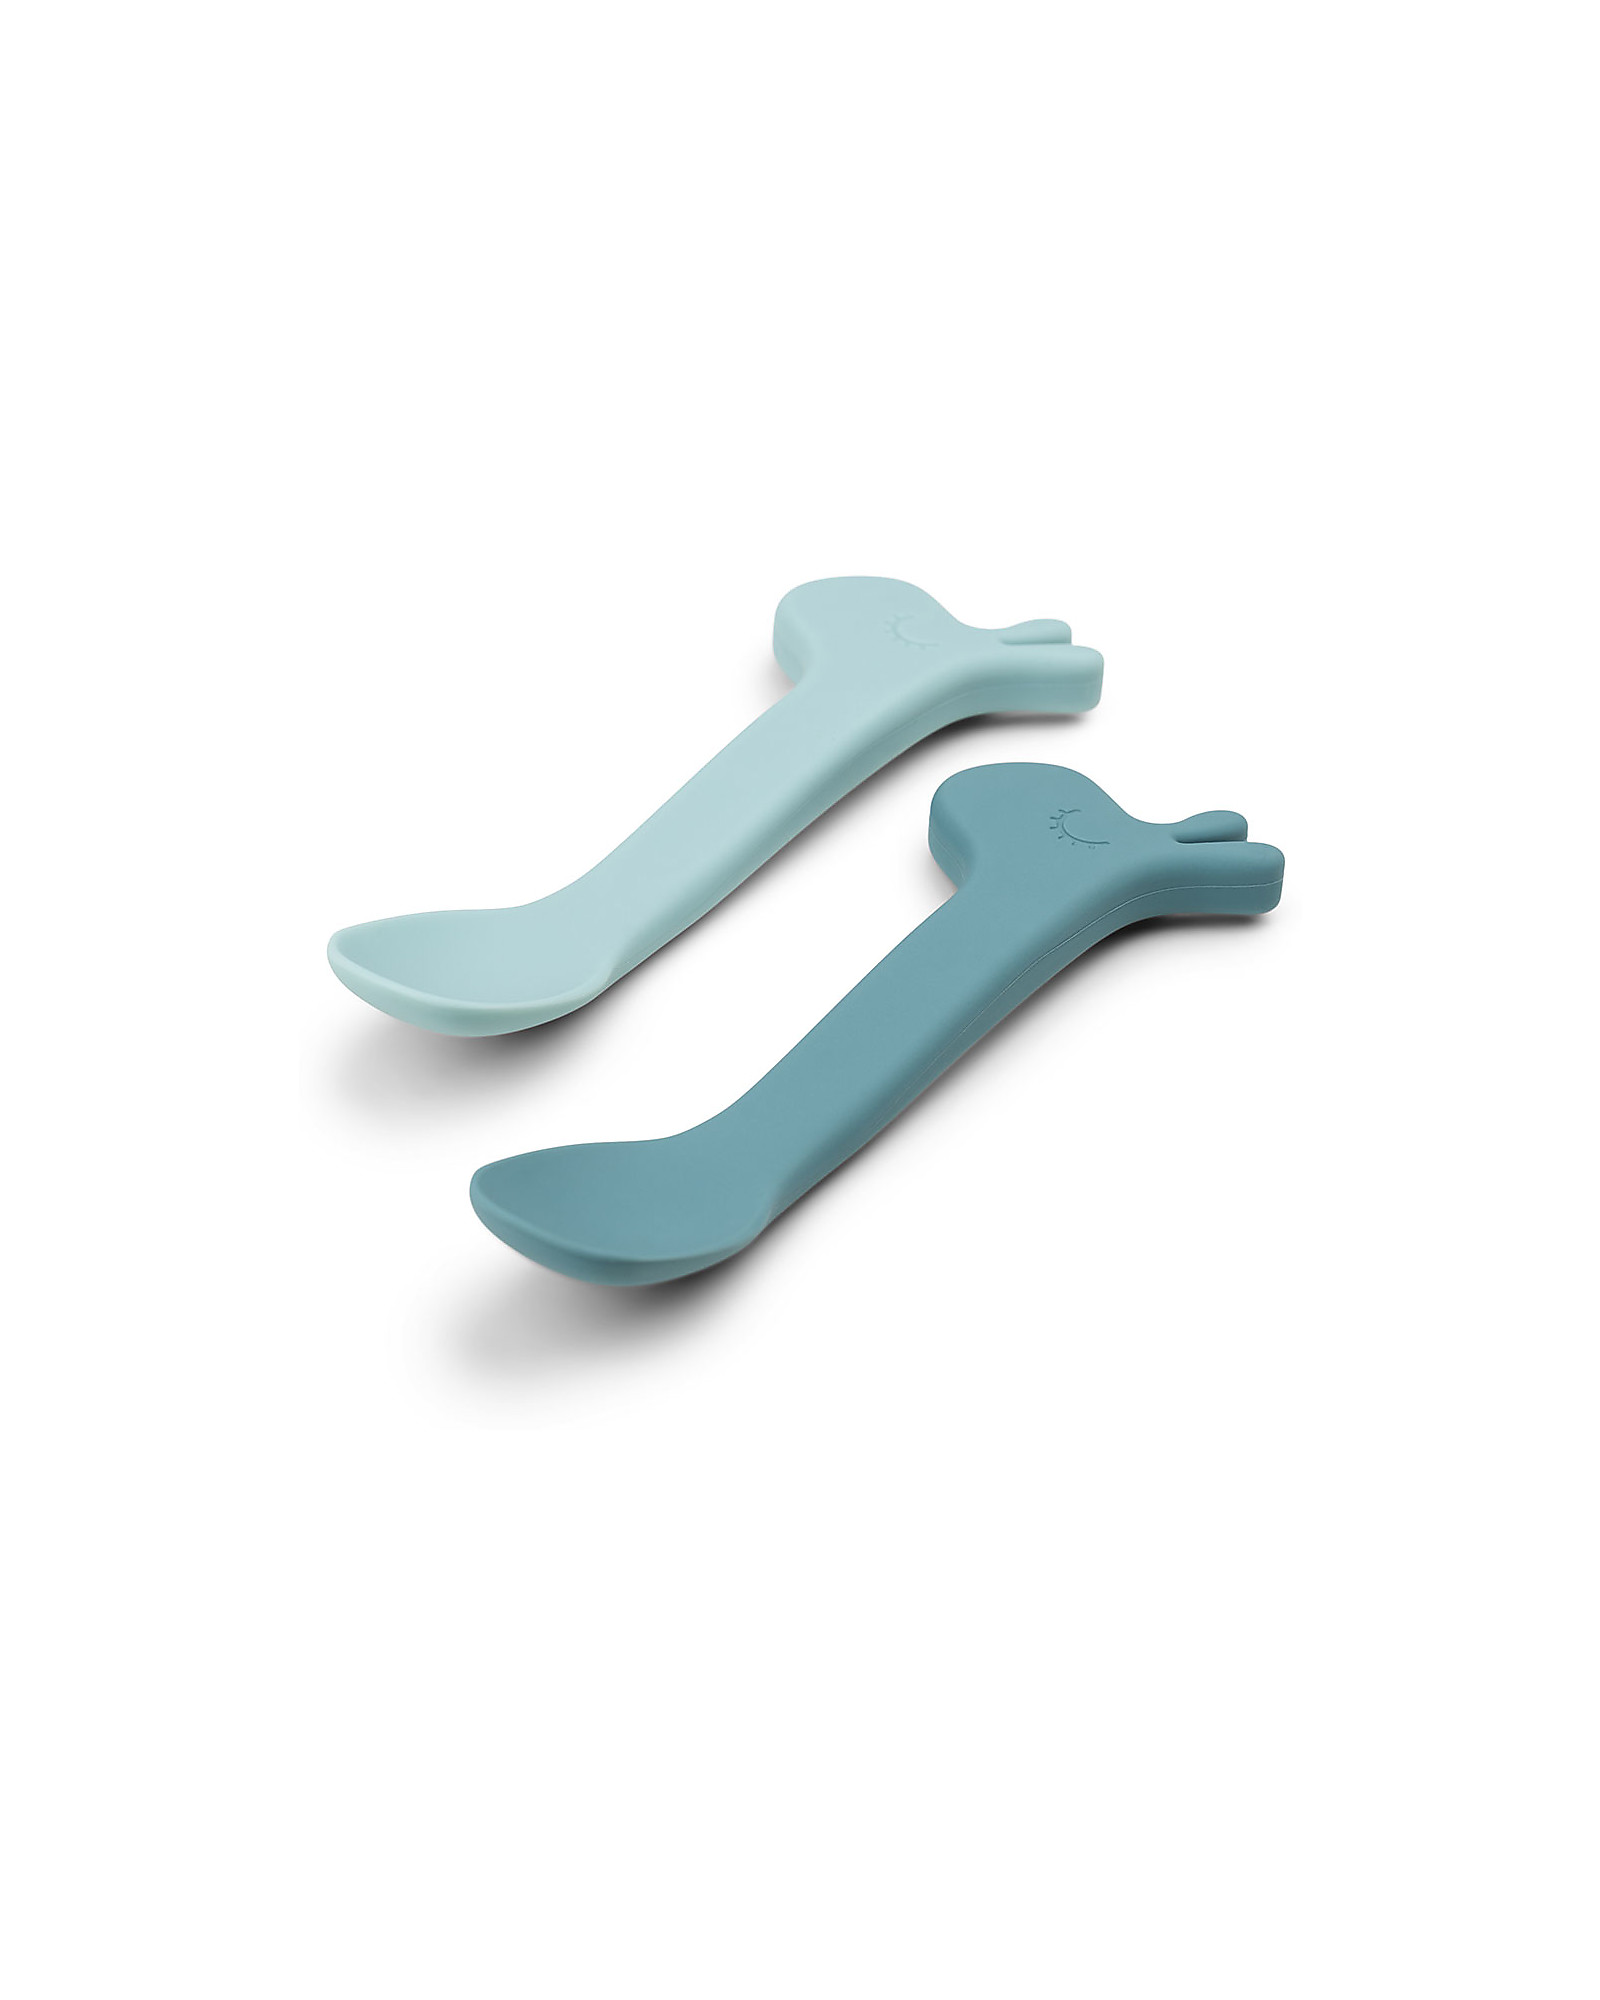 https://data.family-nation.com/imgprodotto/done-by-deer-silicone-baby-spoon-2-pack-lalee-blue-cutlery_469162_zoom.jpg